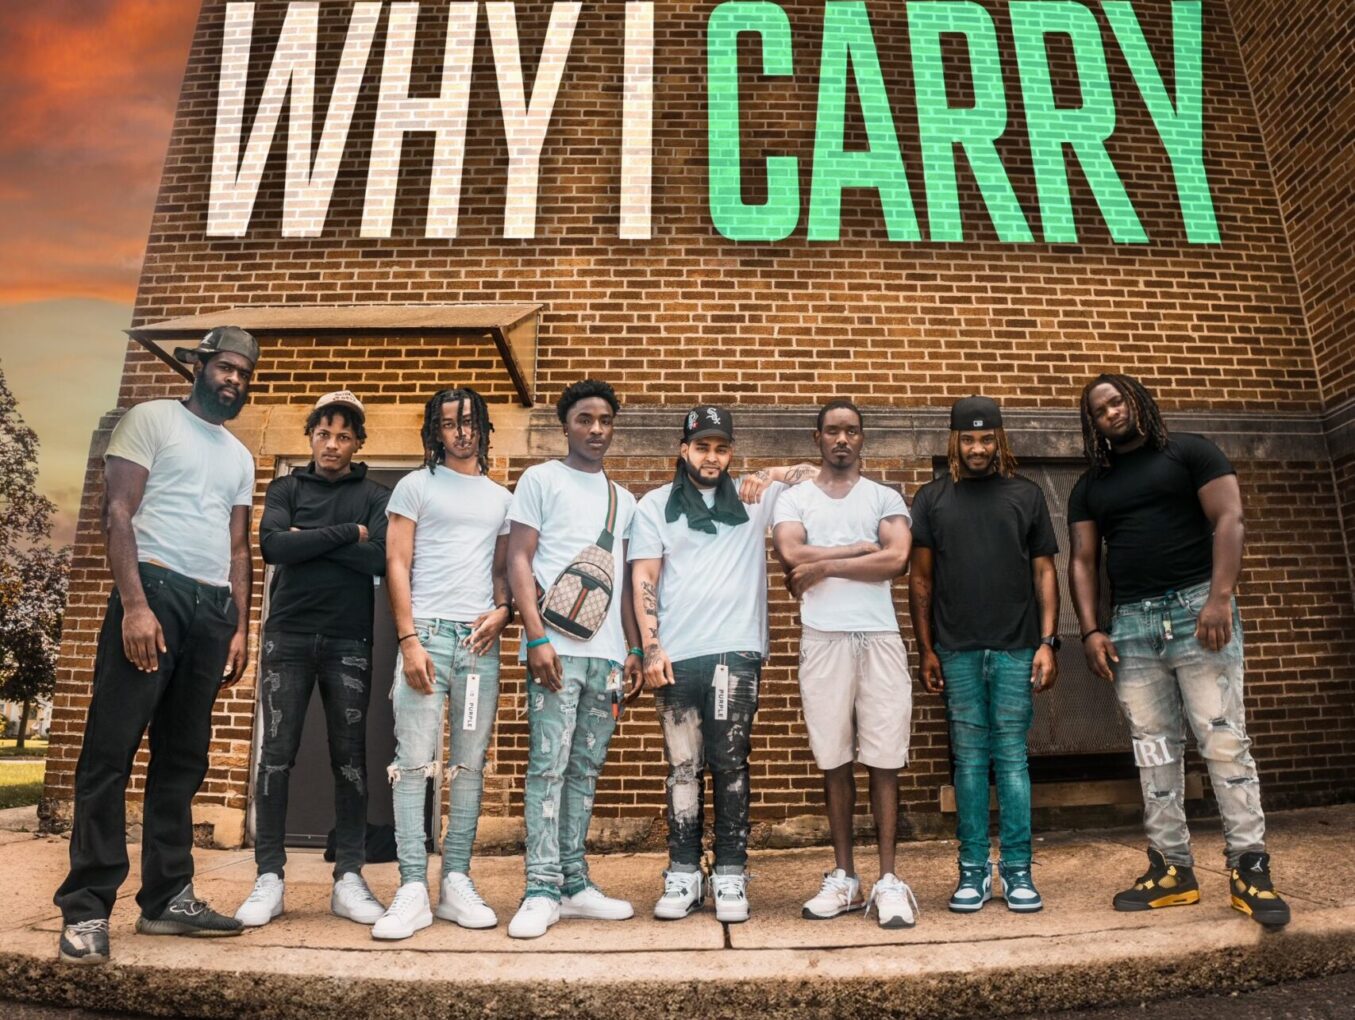 James R. Halsey Foundation Presents “Why I Carry”